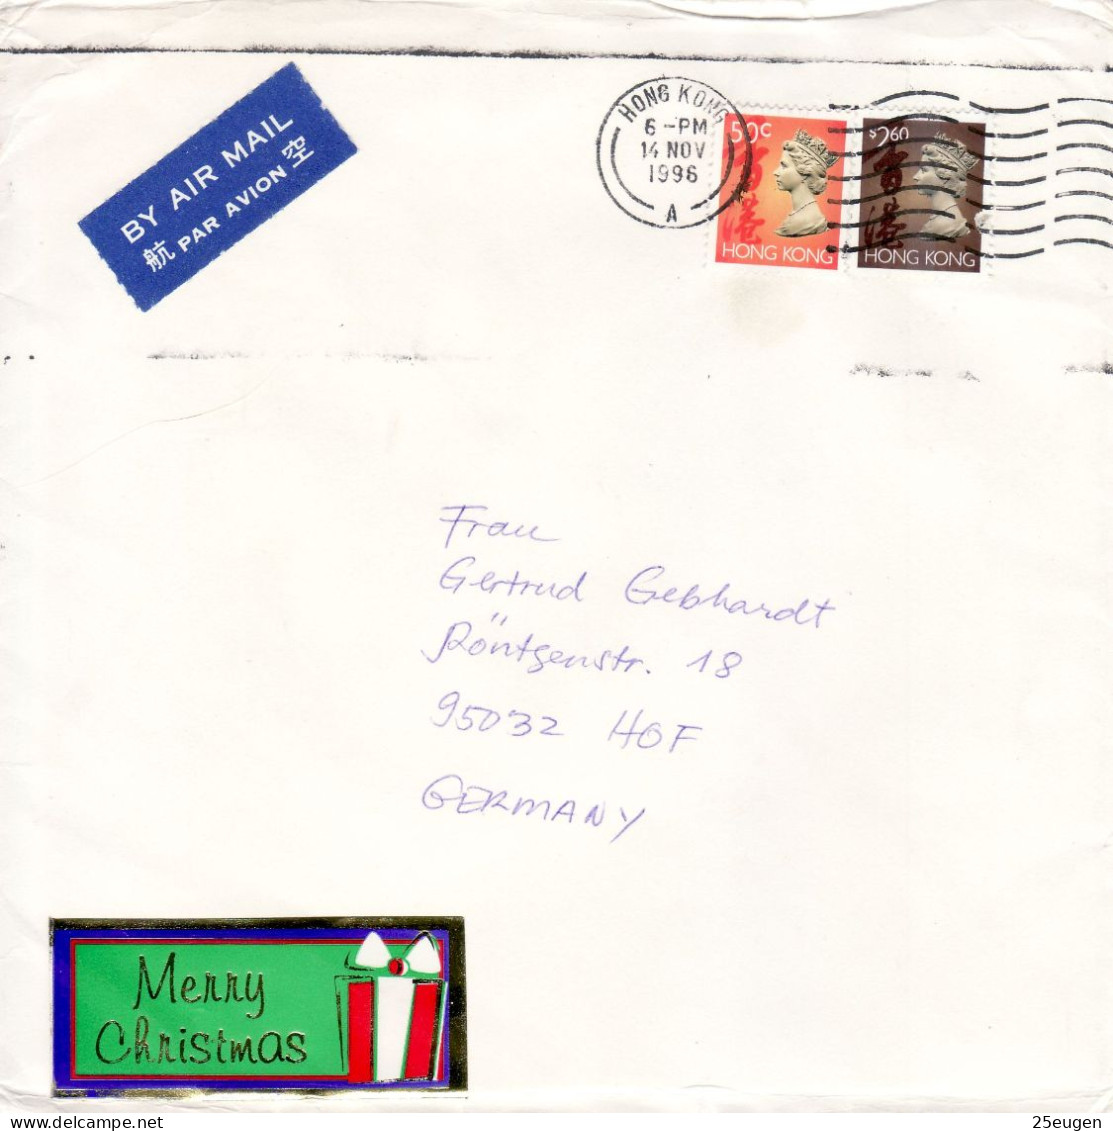 HONG KONG 1996  AIRMAIL  LETTER SENT  TO HOF - Covers & Documents